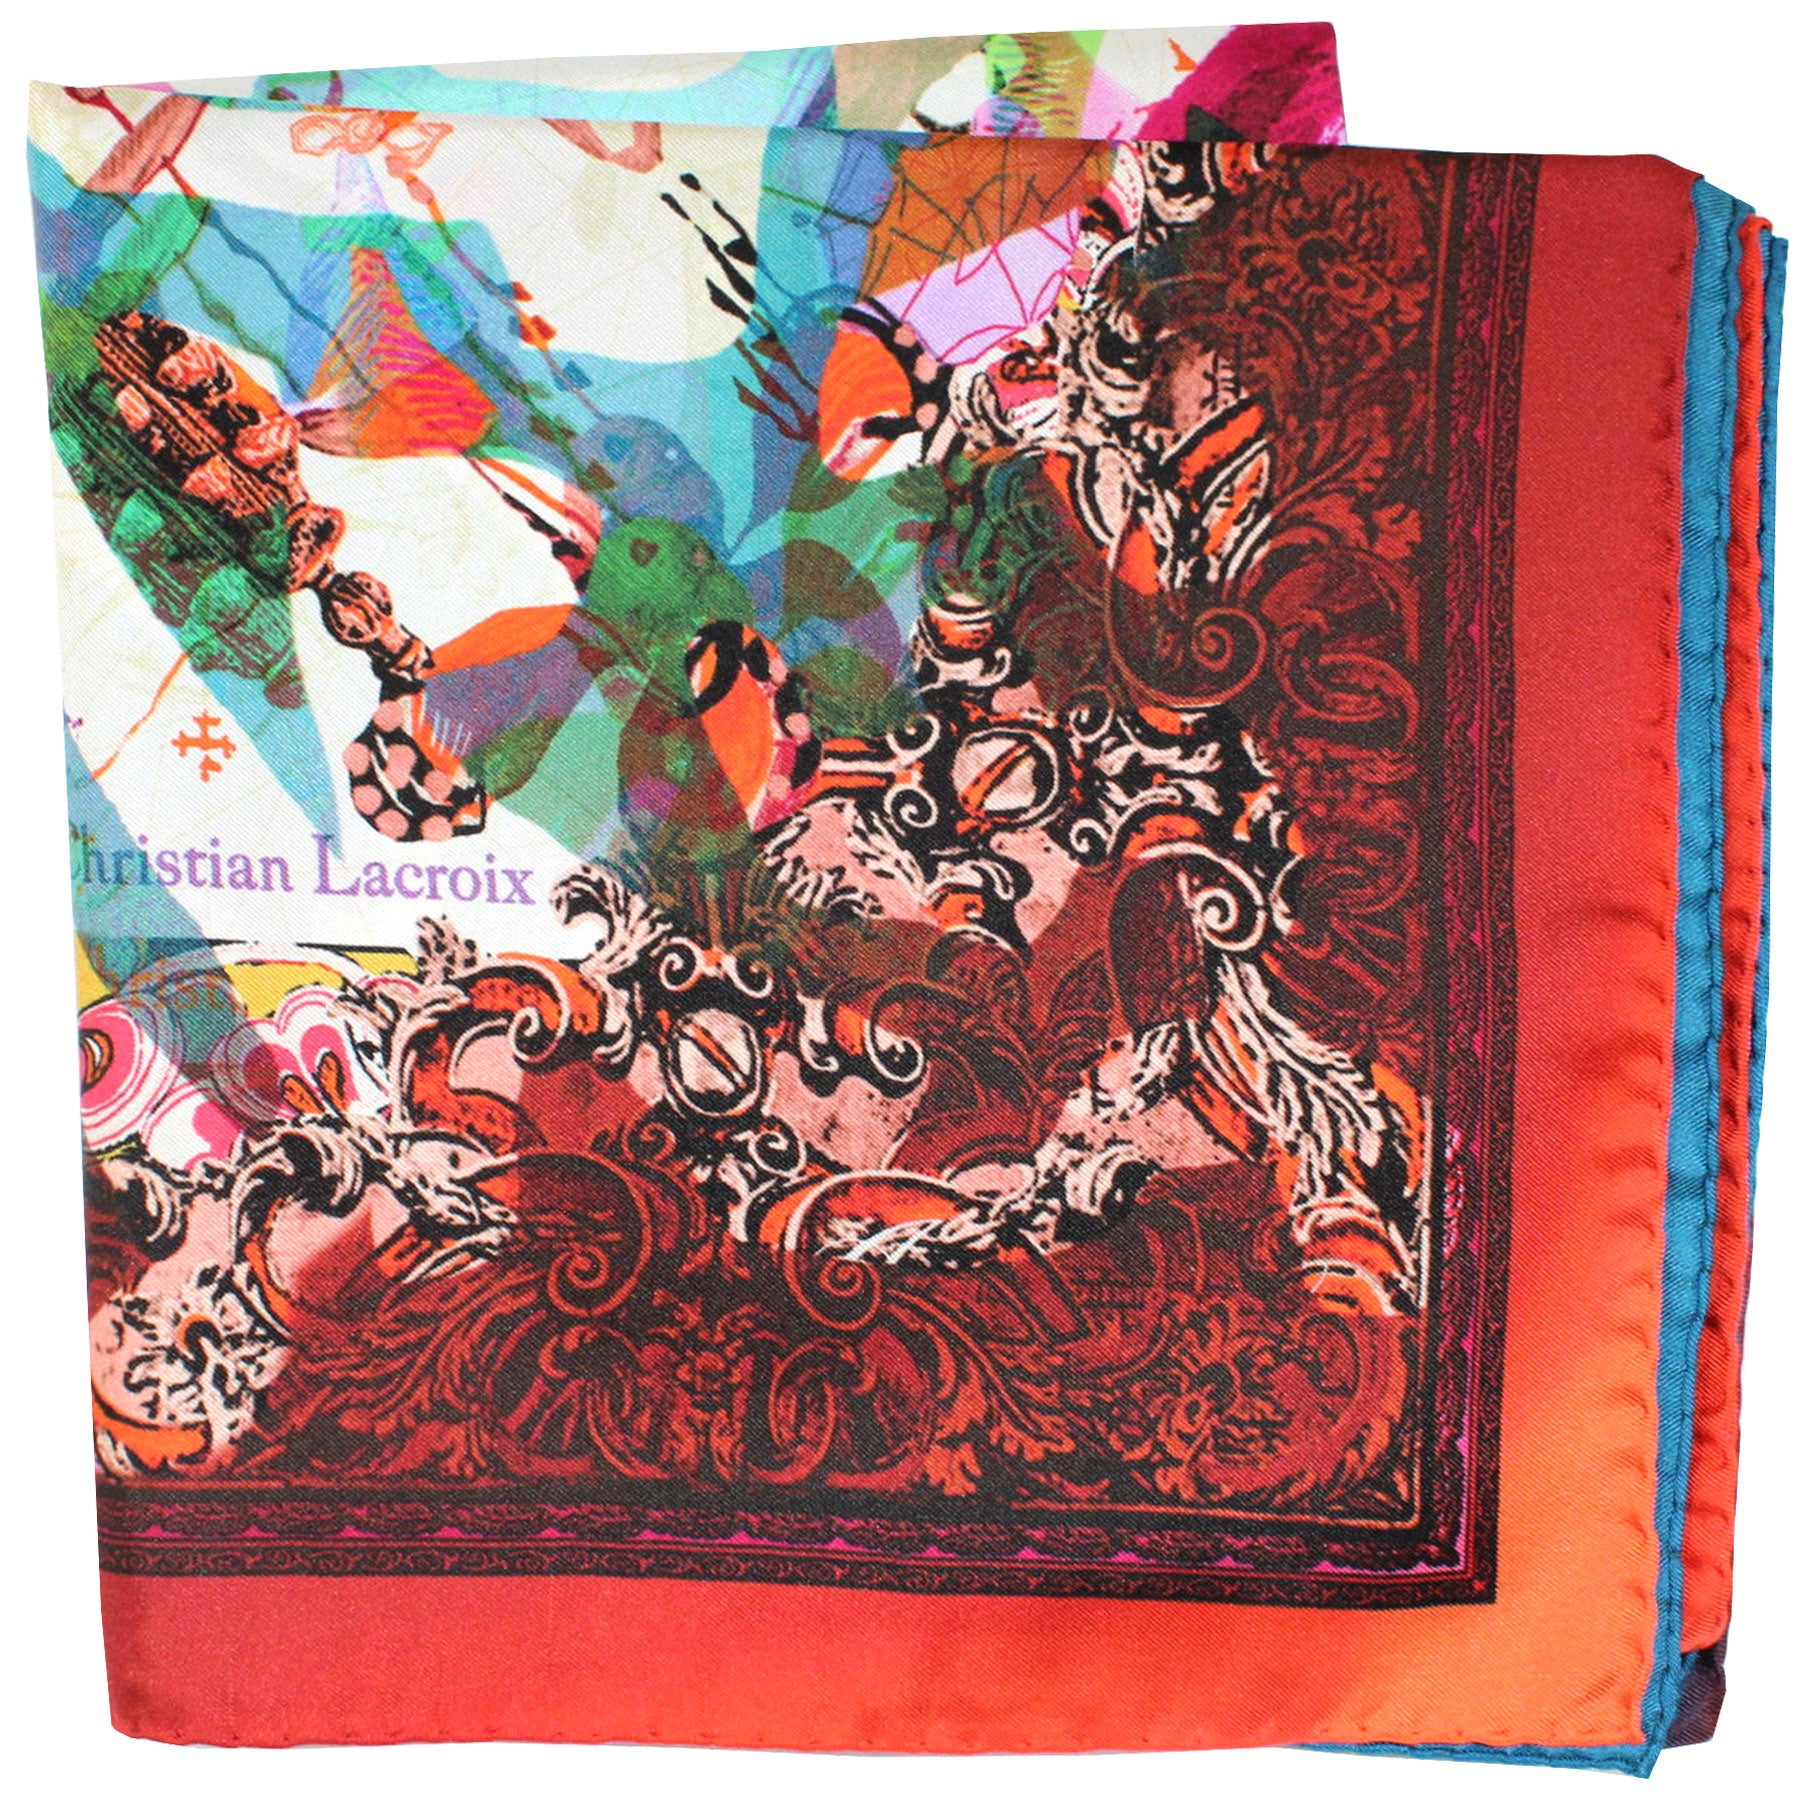 Christian Lacroix Scarf Red Blue Green Ornamental - Large 36 Inch Square Twill Silk Scarf